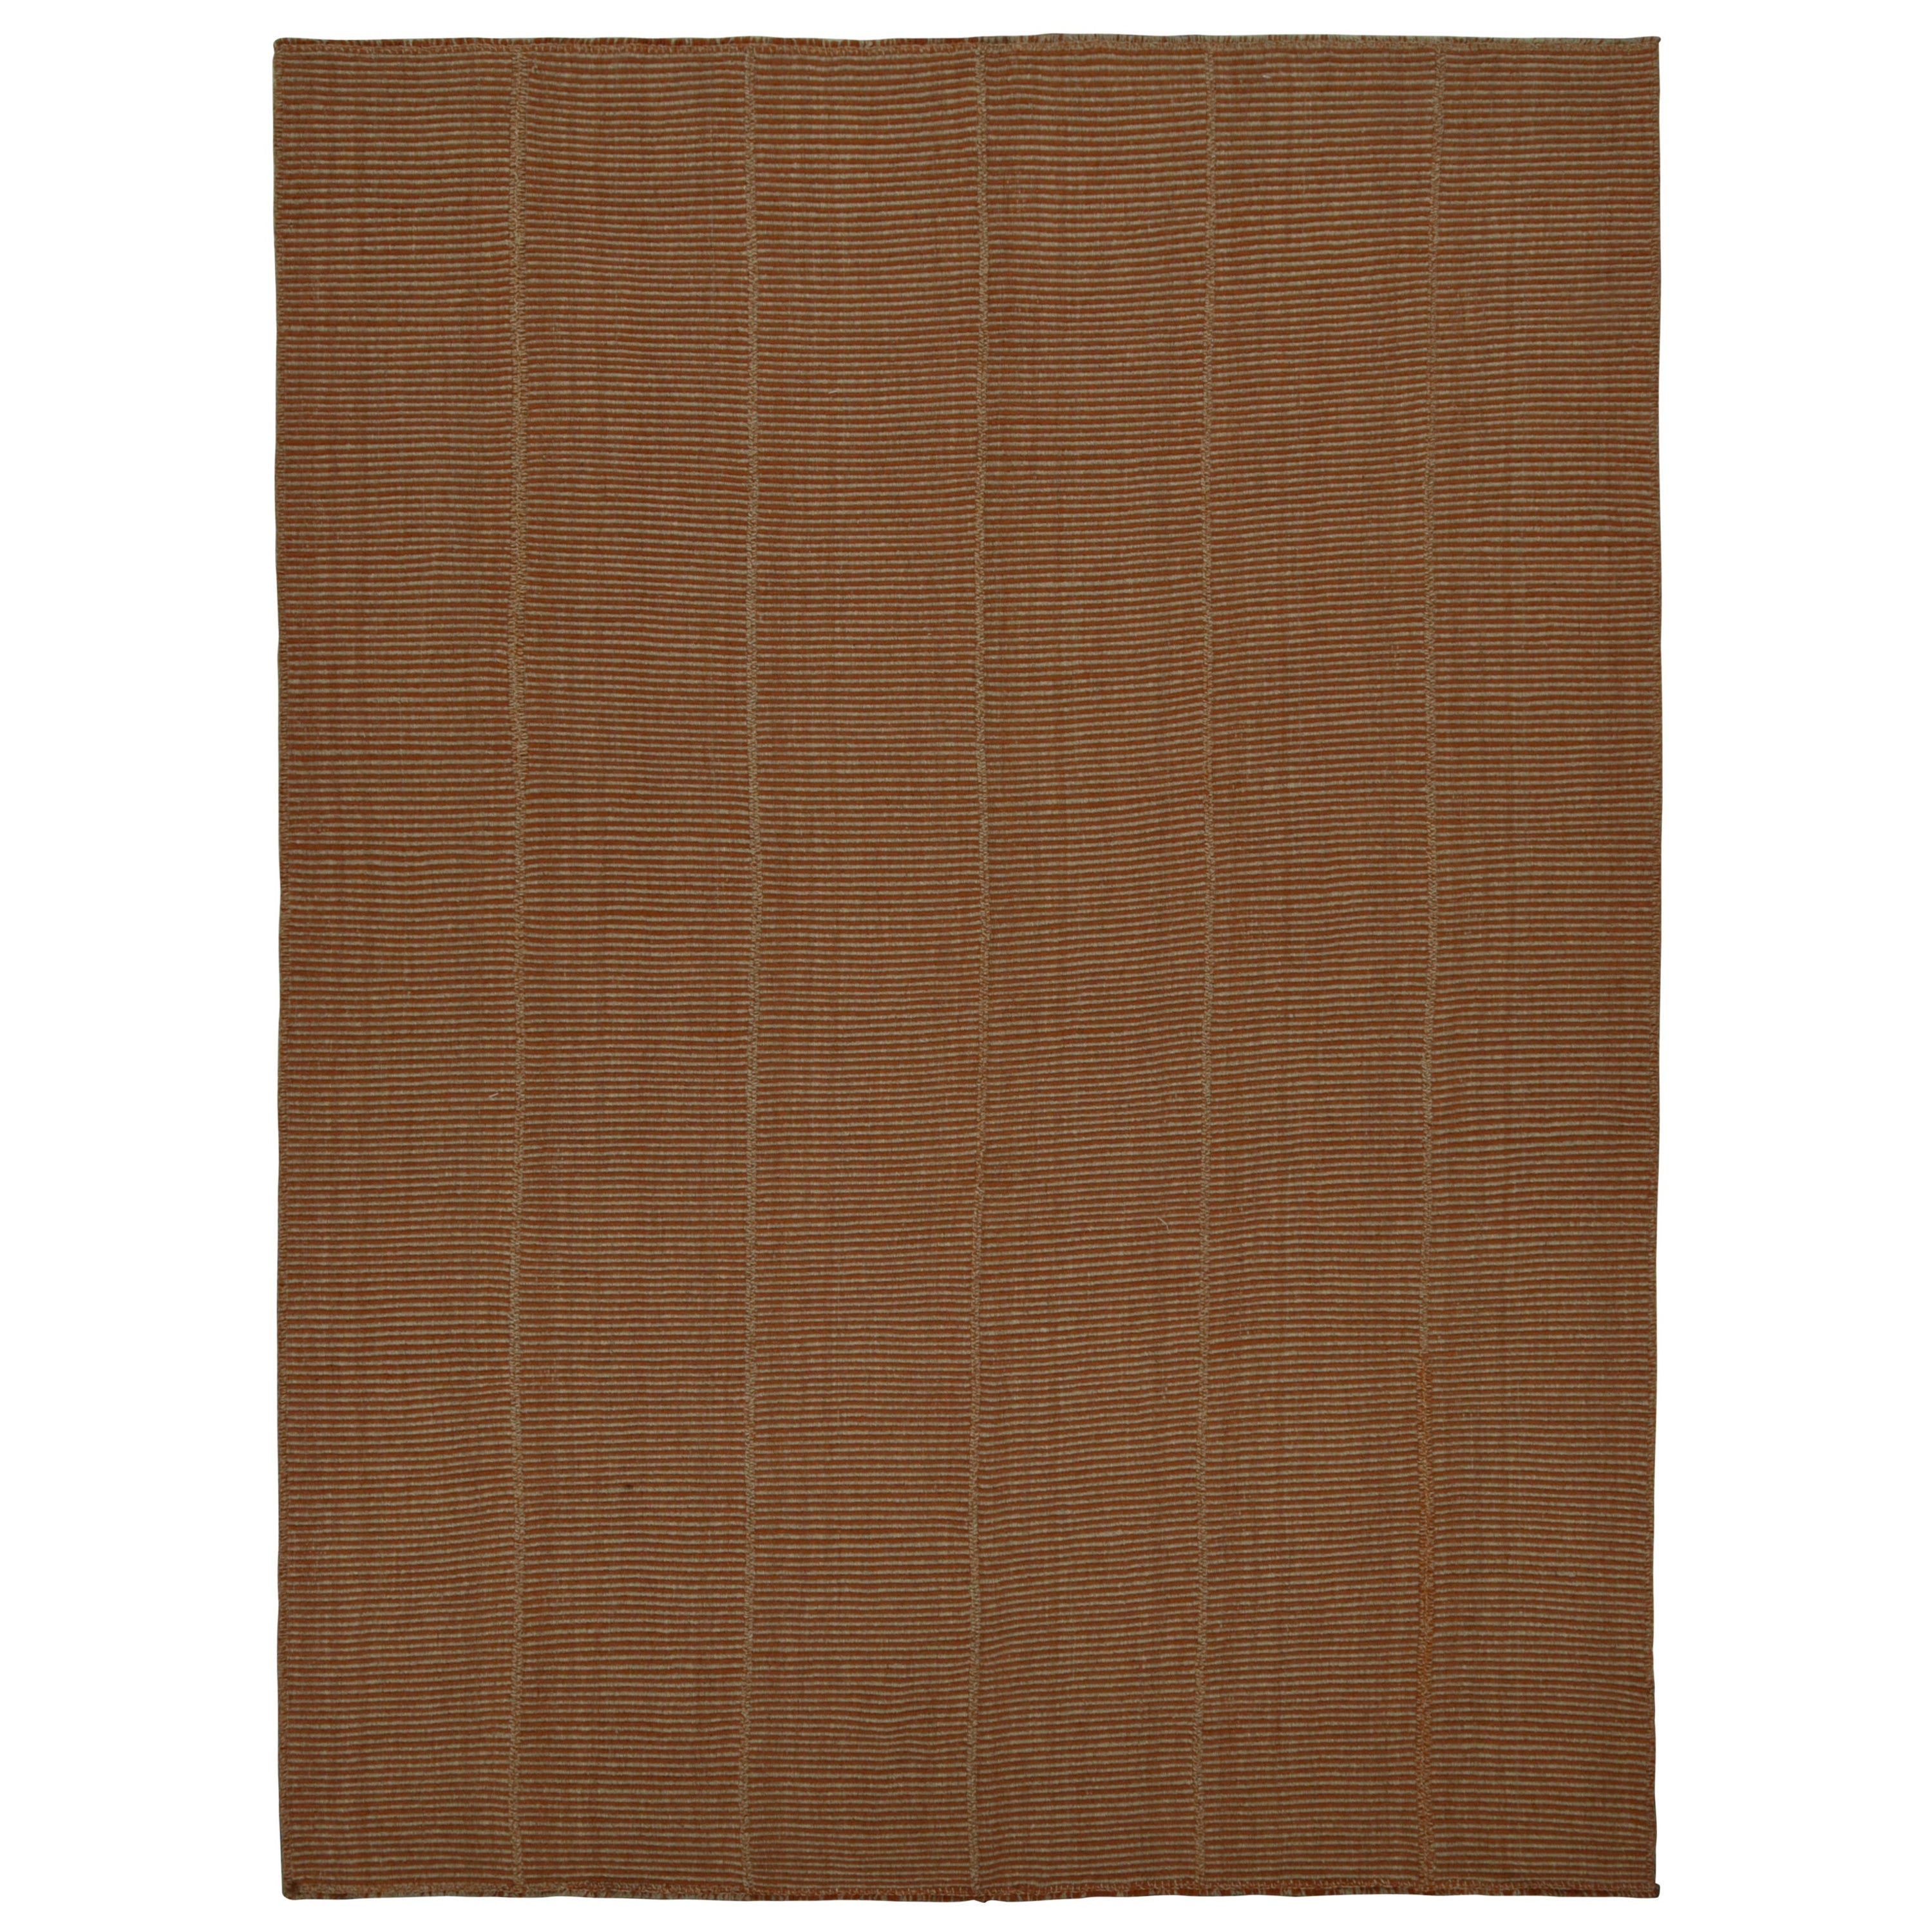 Rug & Kilim’s Modern Kilim in Beige & Rust orange stripes with Taupe accents  For Sale